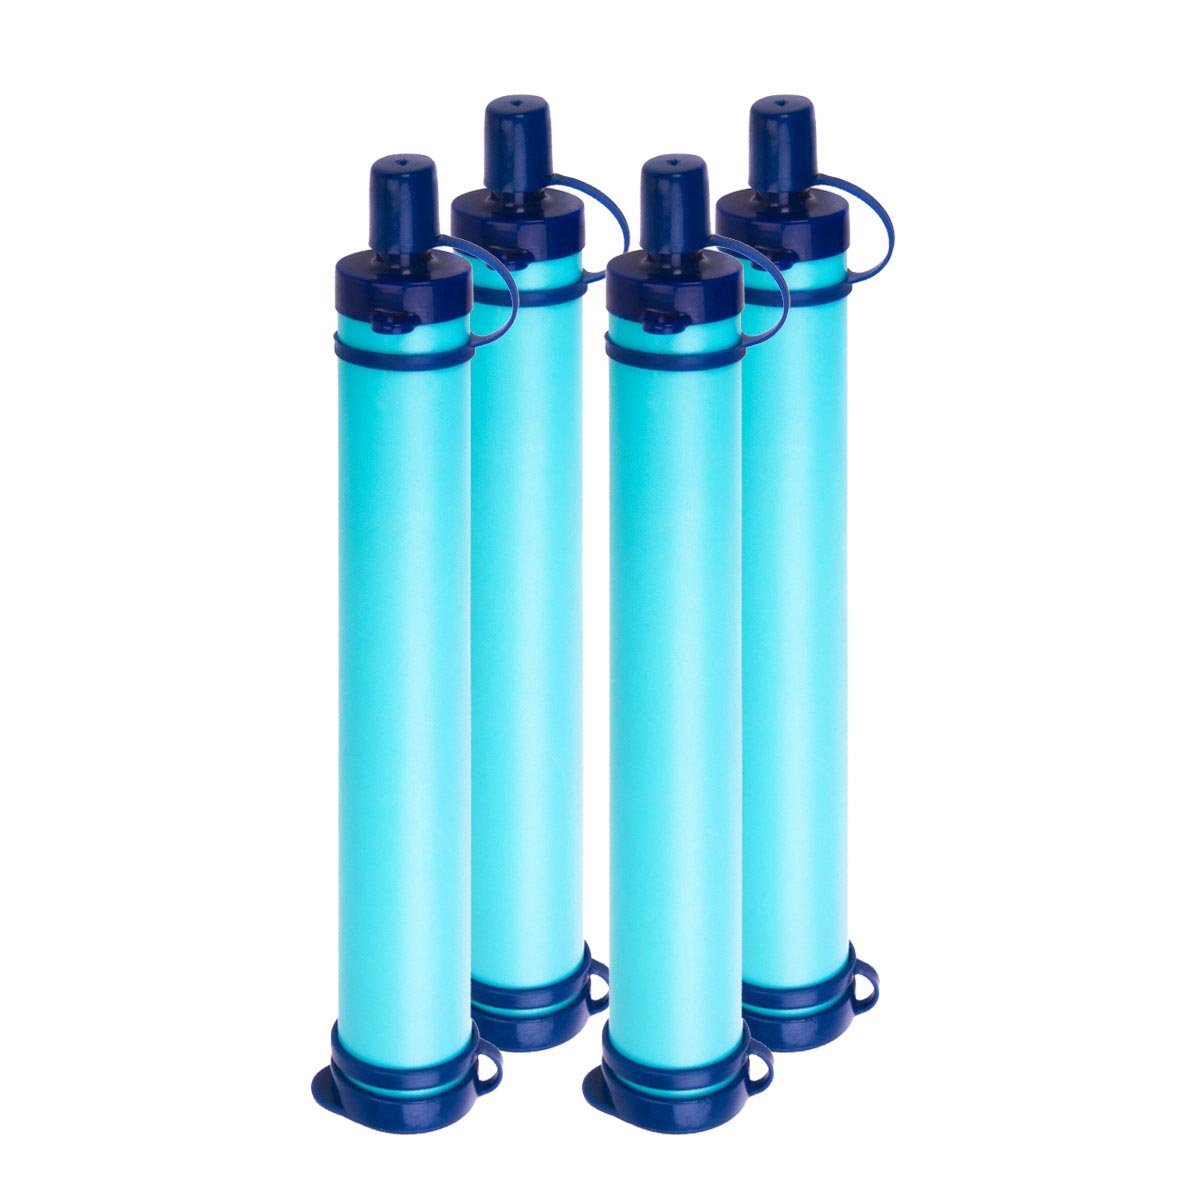 Portable Water Filter for Camping, Water Purifier, Set of 4